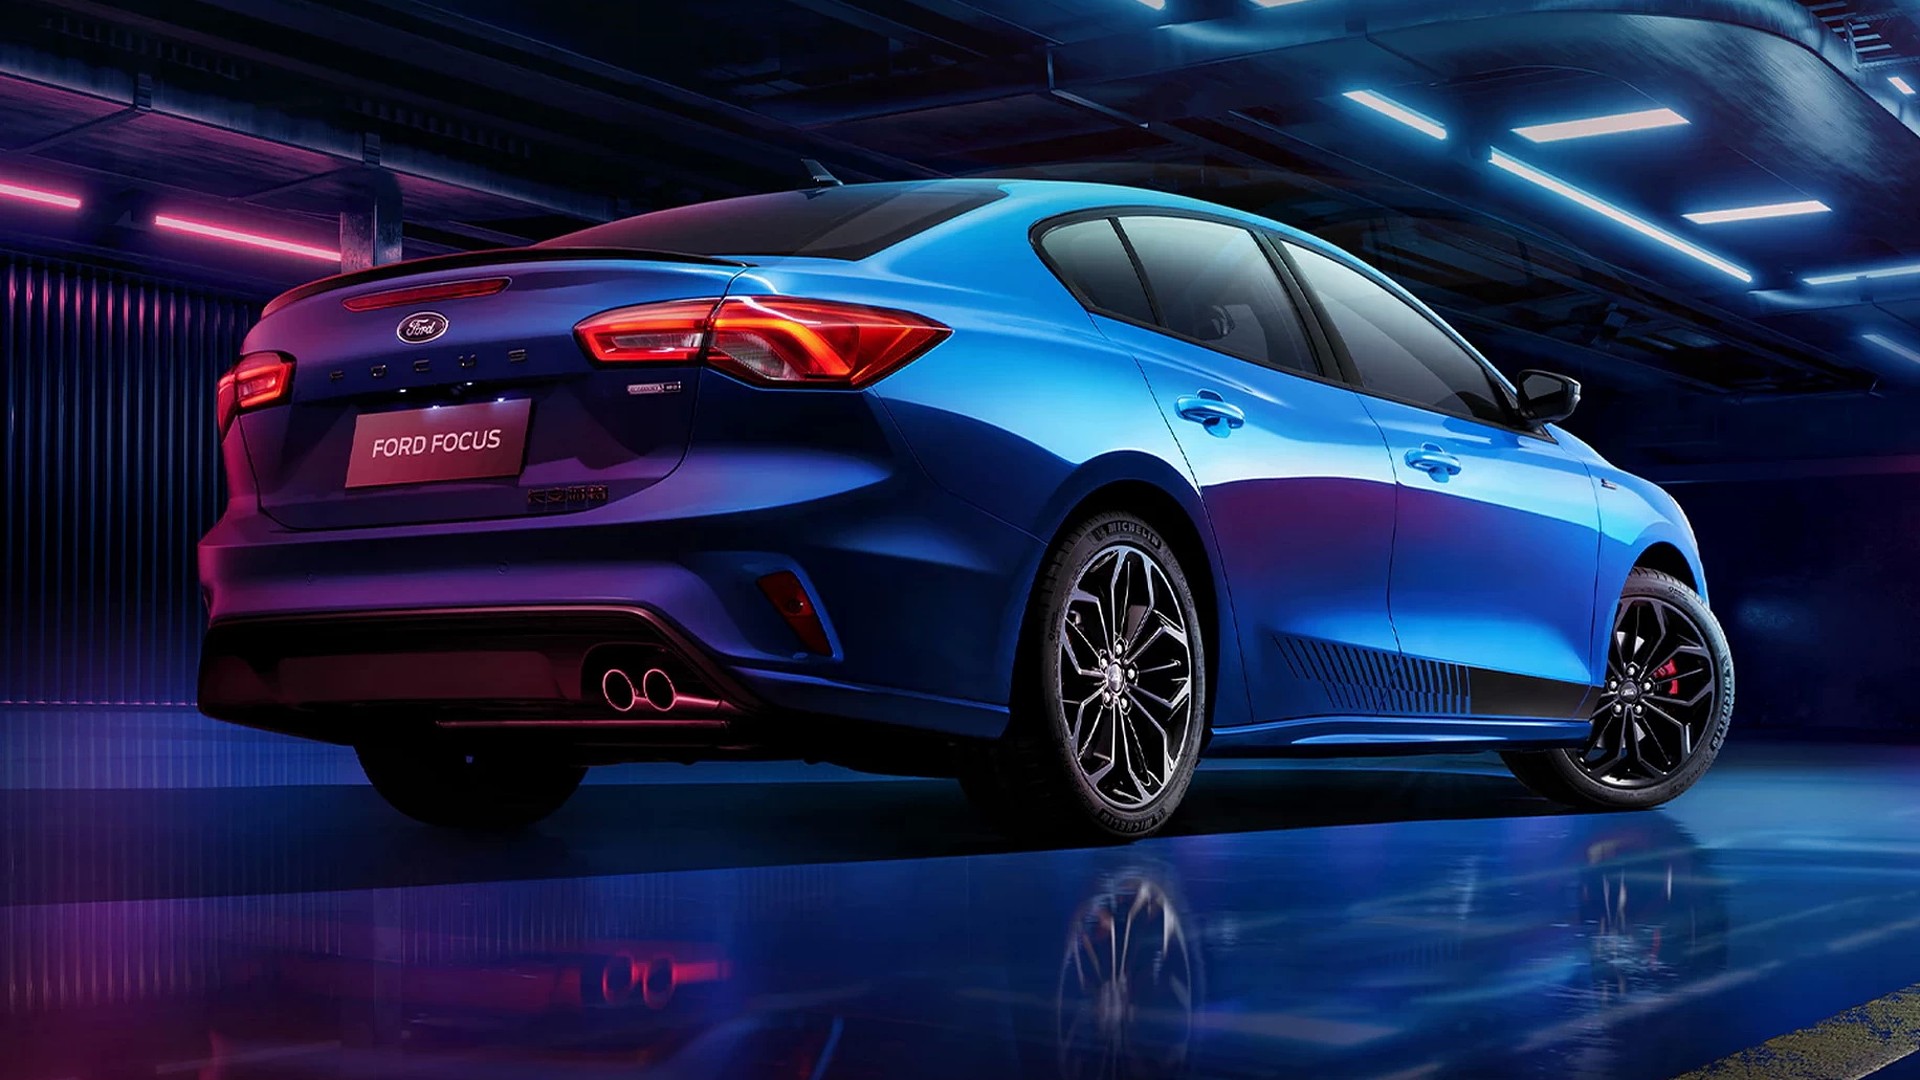 2022-Ford-Focus-Facelift-Chinese-Spec-6.